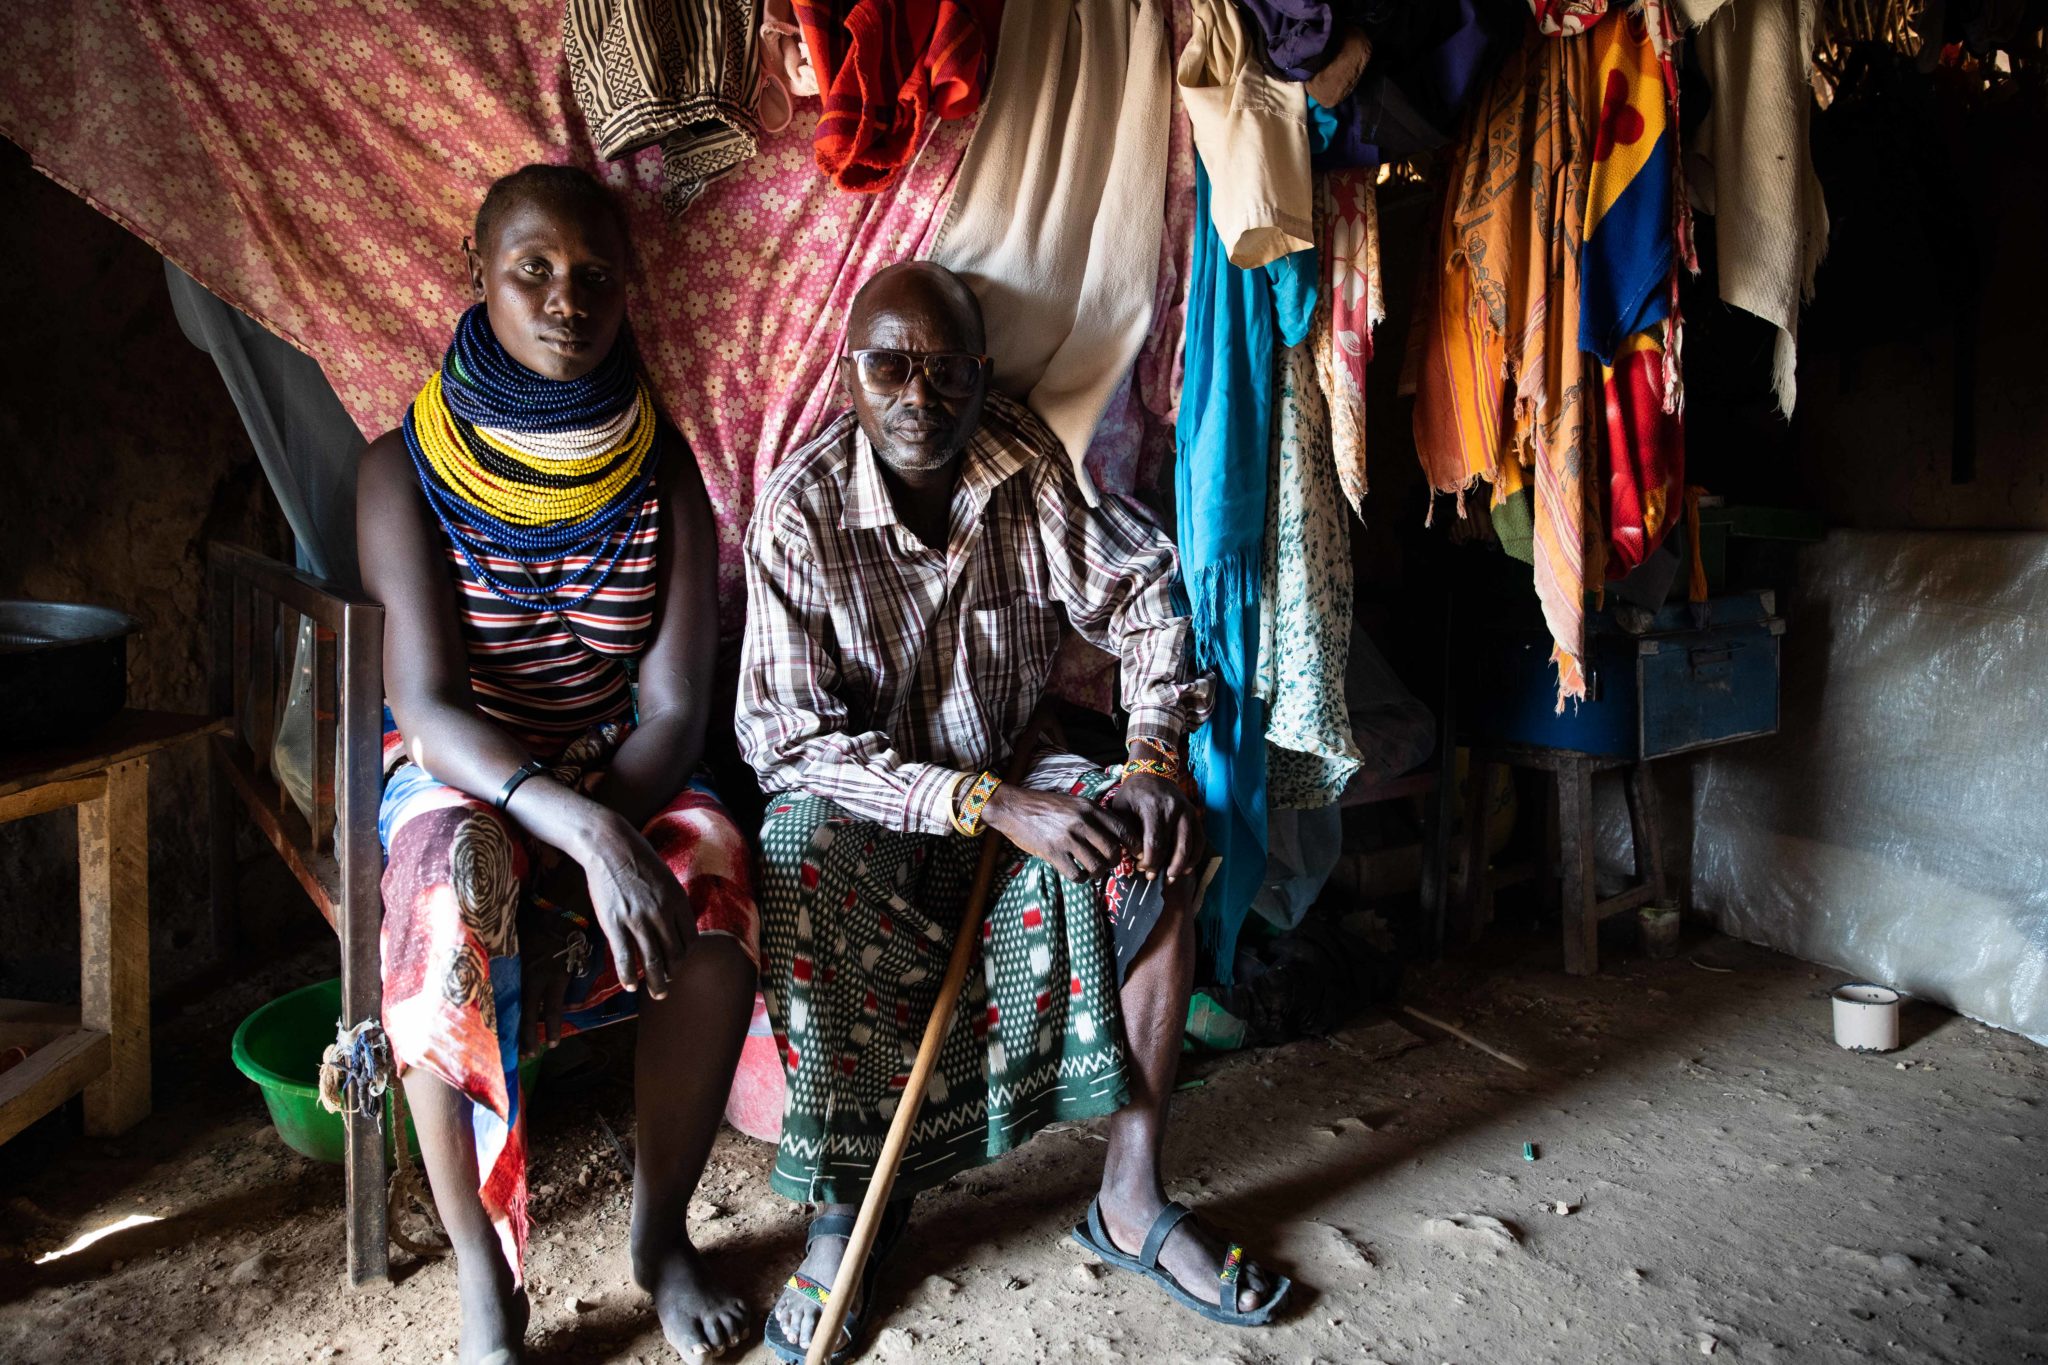 Pastoralist Richard Ekale Nakalale, who lost his sight in 2020, and his wife pose for a photo at their house in Milimatatu Village, Kaeris, Turkana County in Northern Kenya, 27-06-22. Image: Lisa Murray/Concern Worldwide.